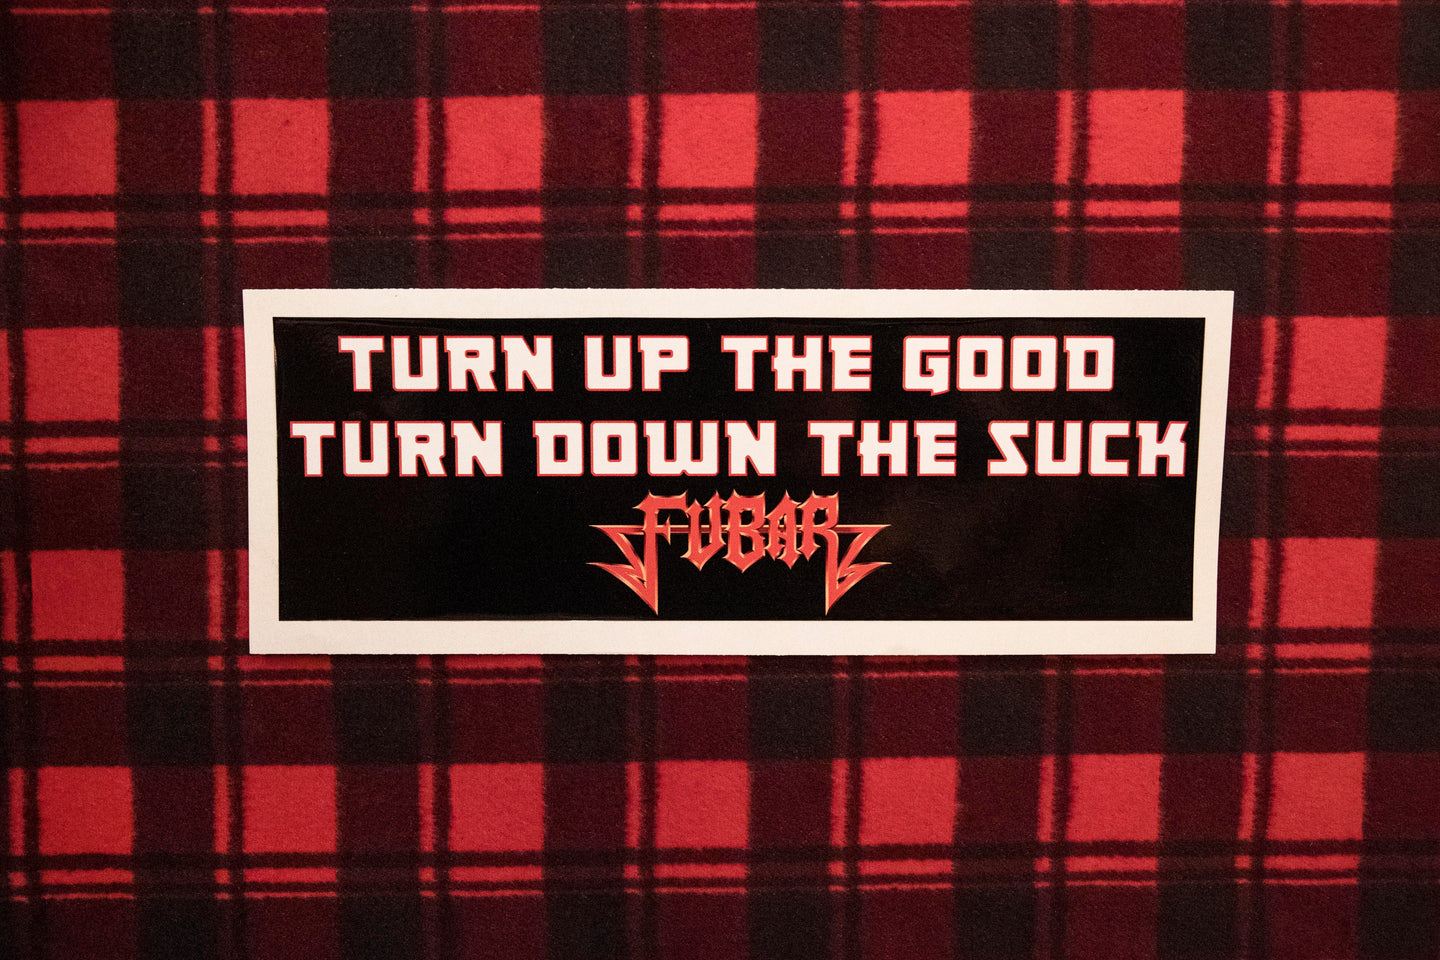 FUBAR - Turn Up the Good Bumper Sticker 4 by 15 Inches